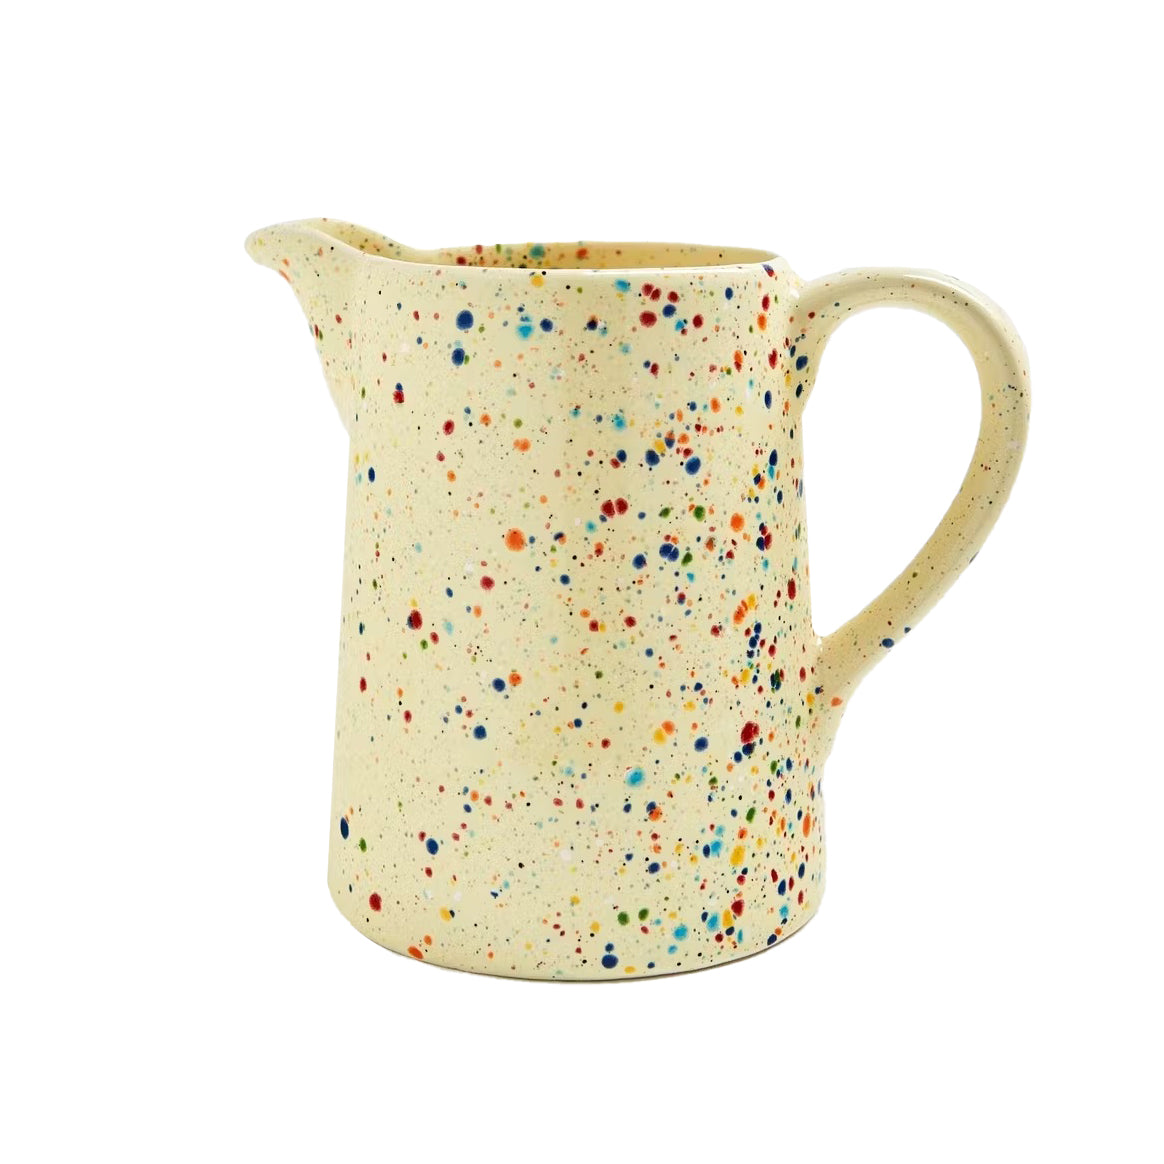 Marbled Enamel Pitcher - small